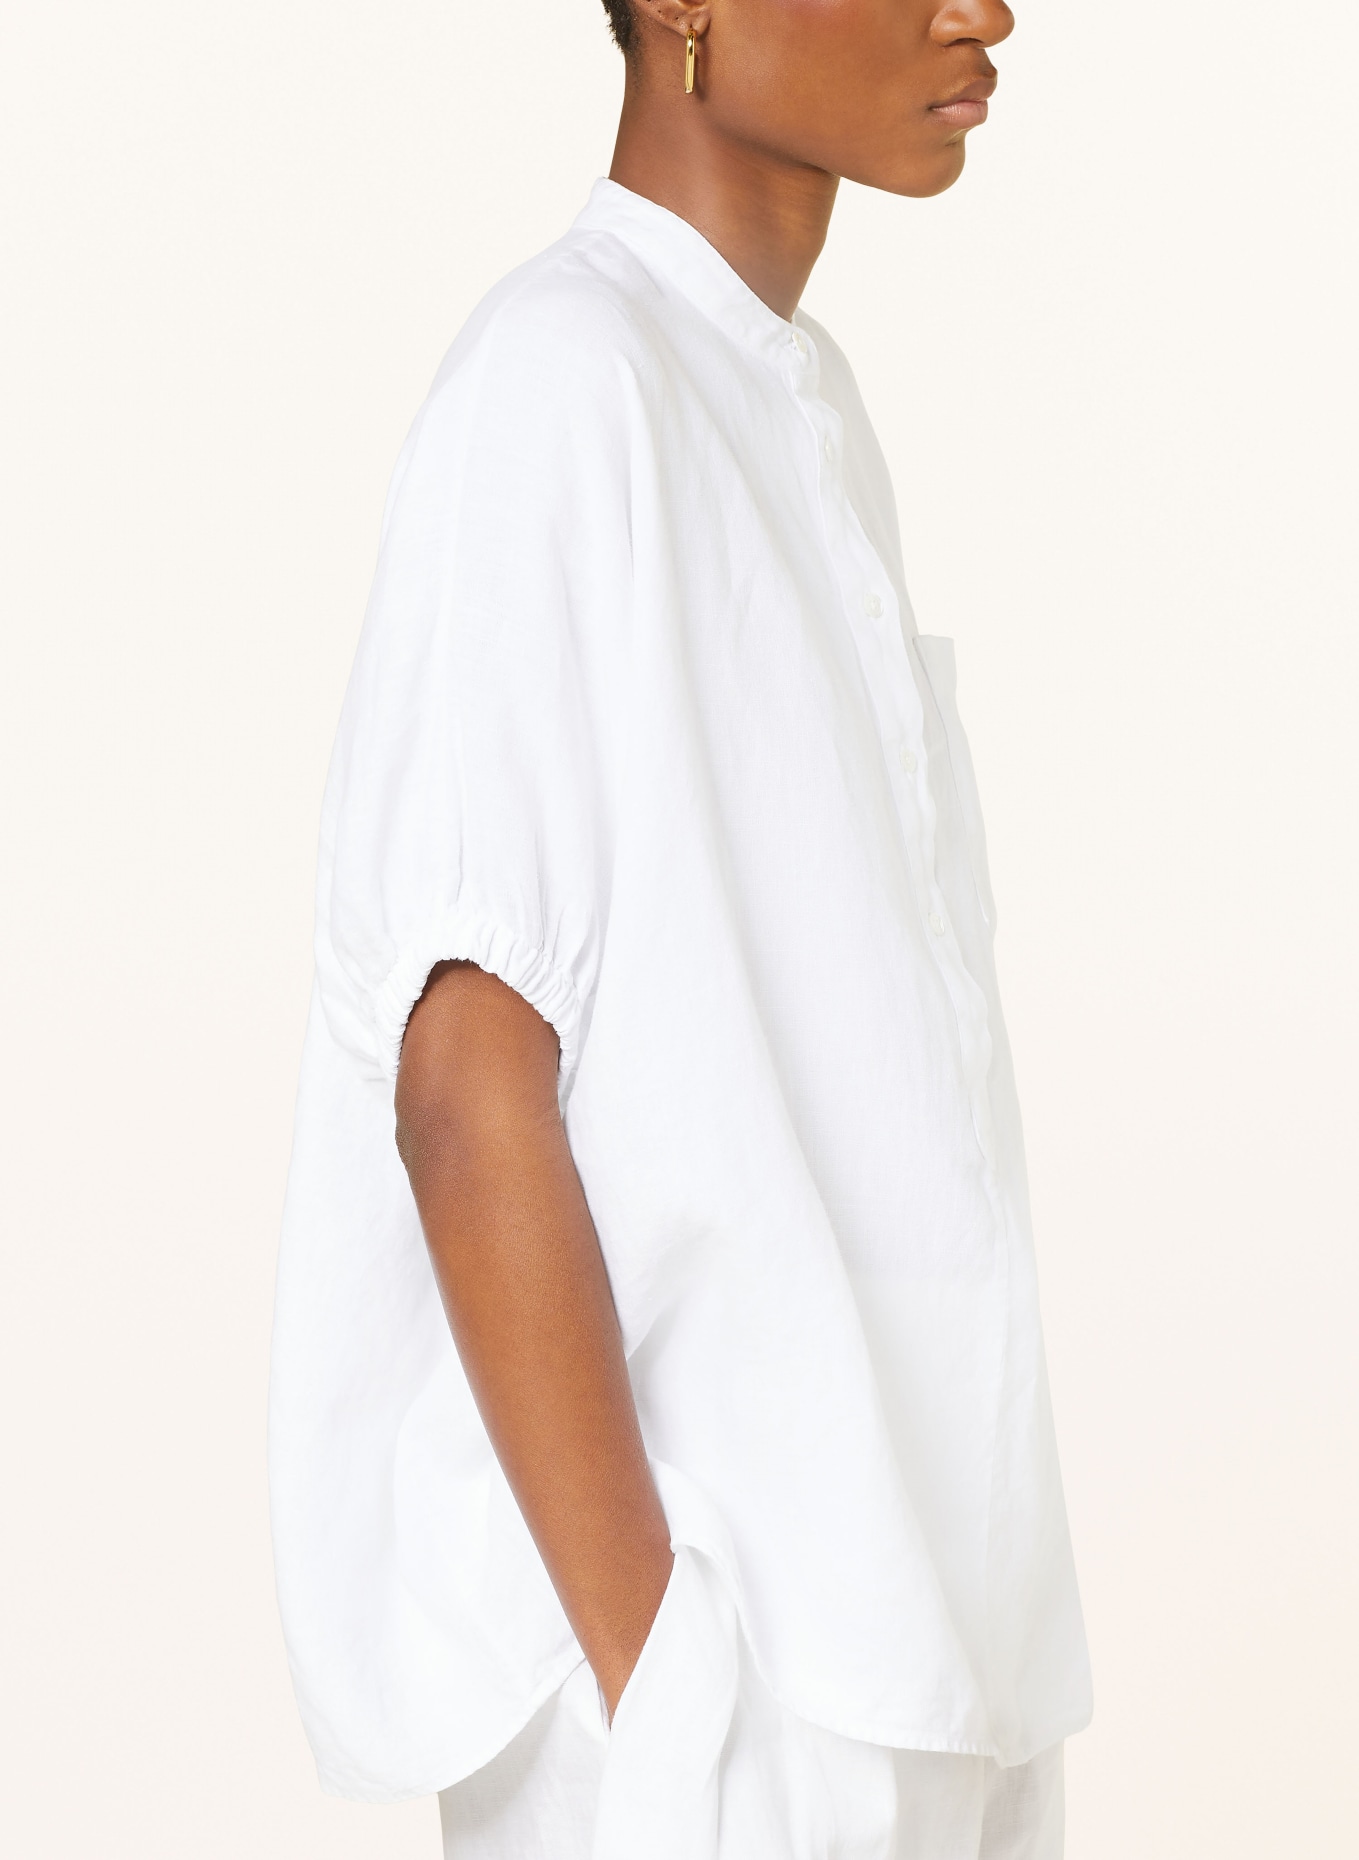 SoSUE Shirt blouse made of linen, Color: WHITE (Image 4)